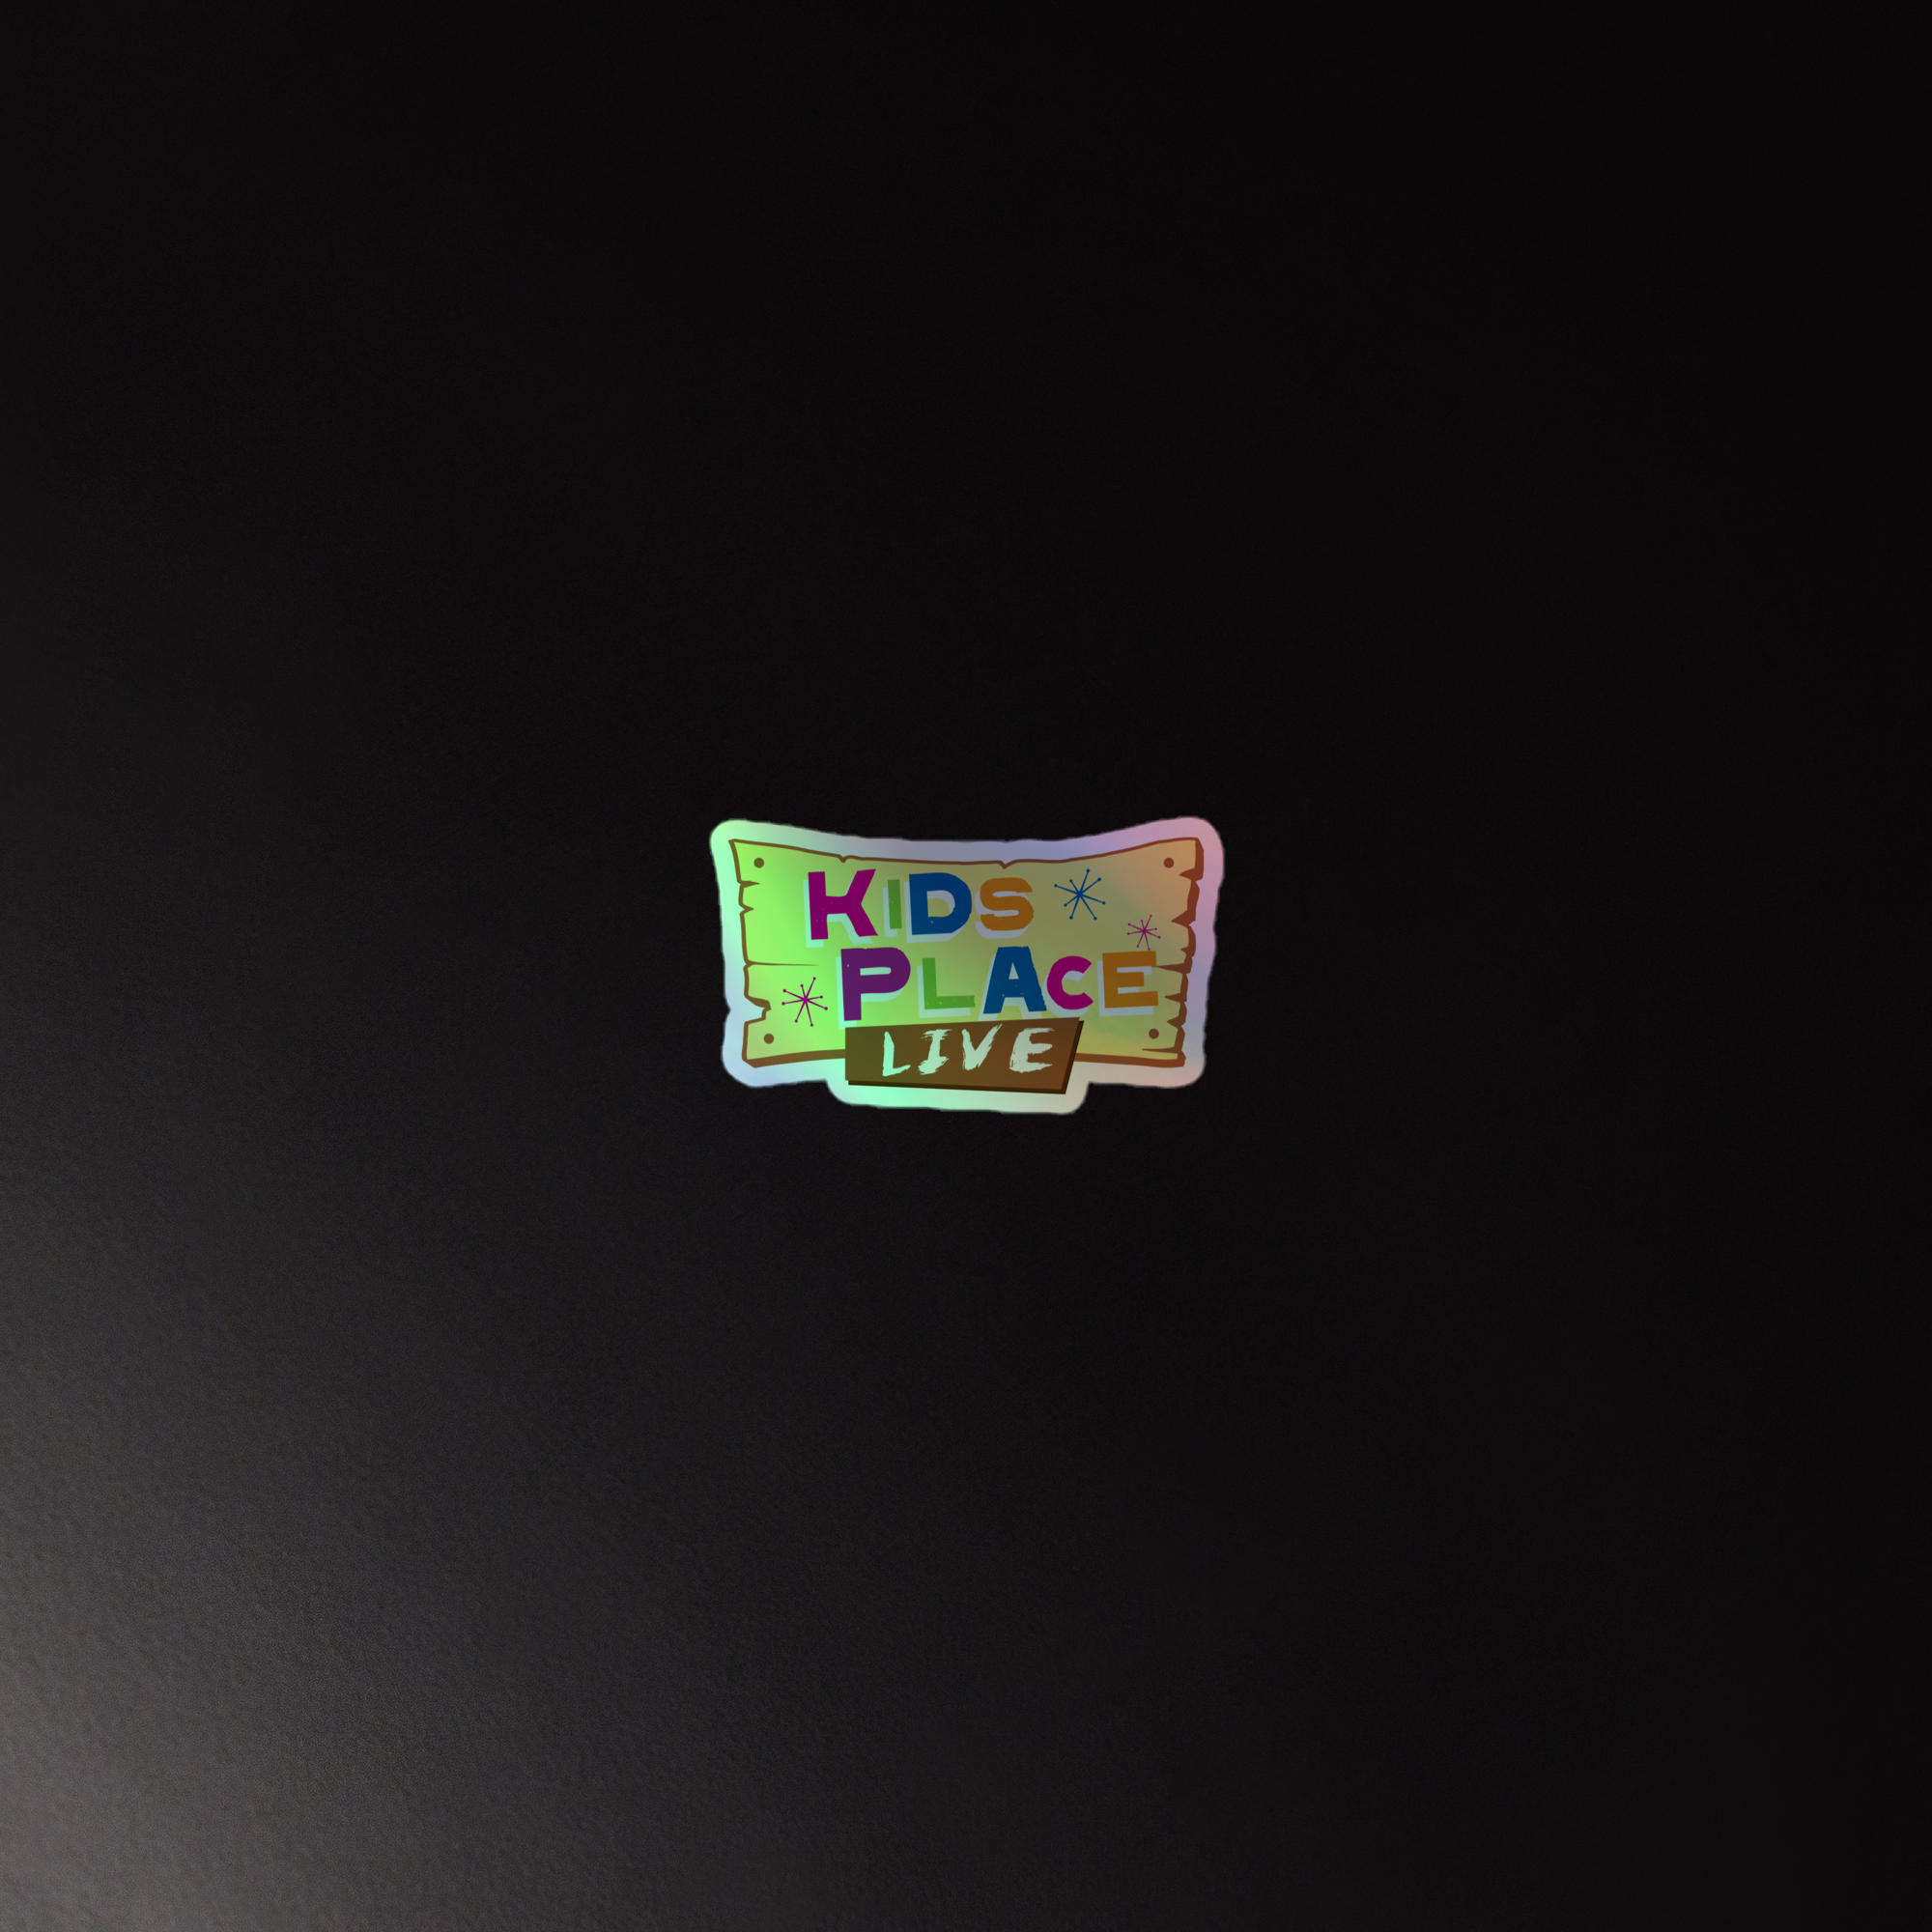 Kids Place Live: Holographic Sticker